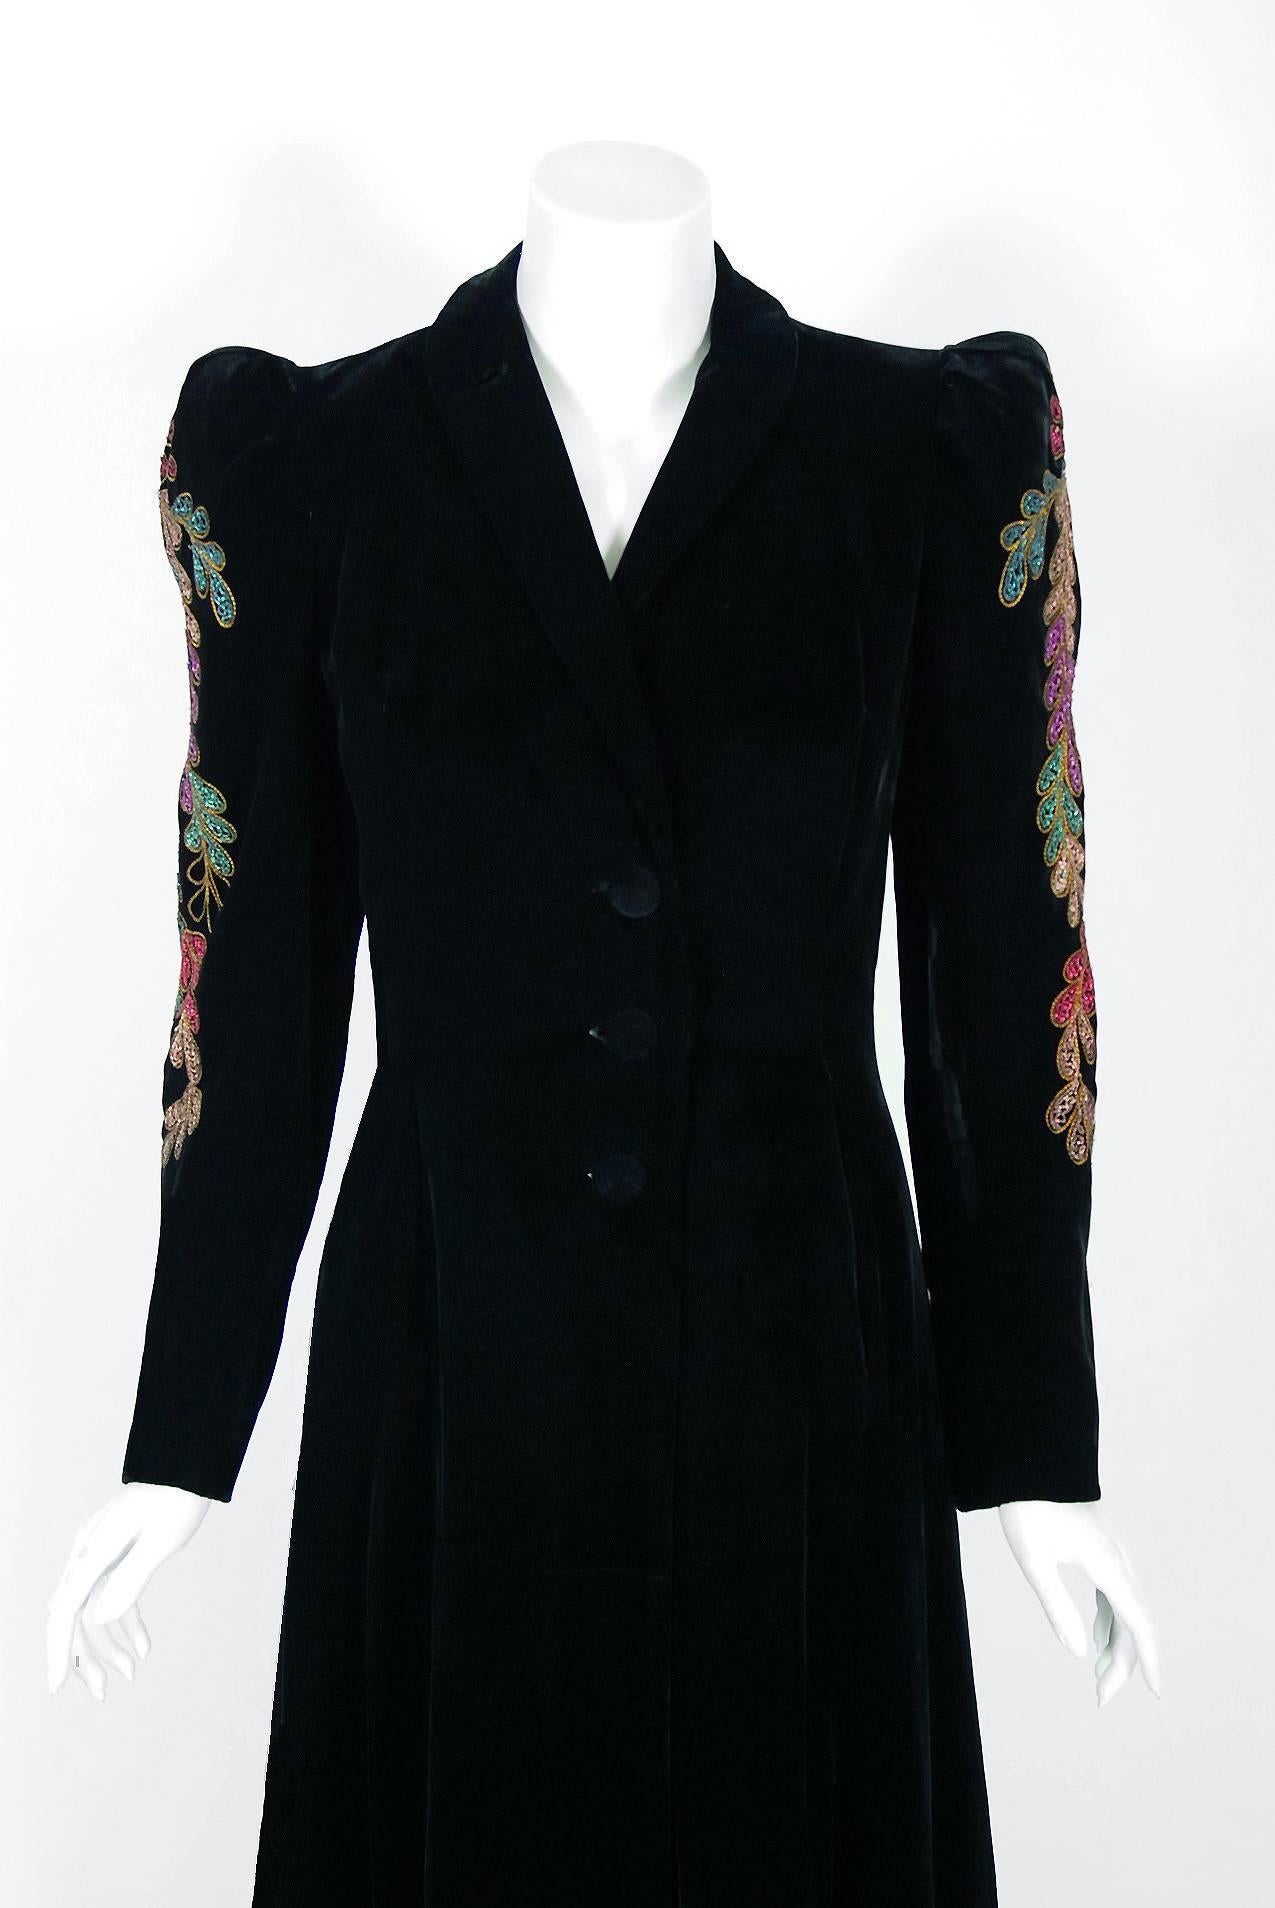 Gertrude Kopelman was one of the high-end American boutiques operating during the Art-Deco era. This breathtaking and unbelievable 1930's black silk-velvet coat will make any woman shine during cold evenings. The workmanship is unbelievable;